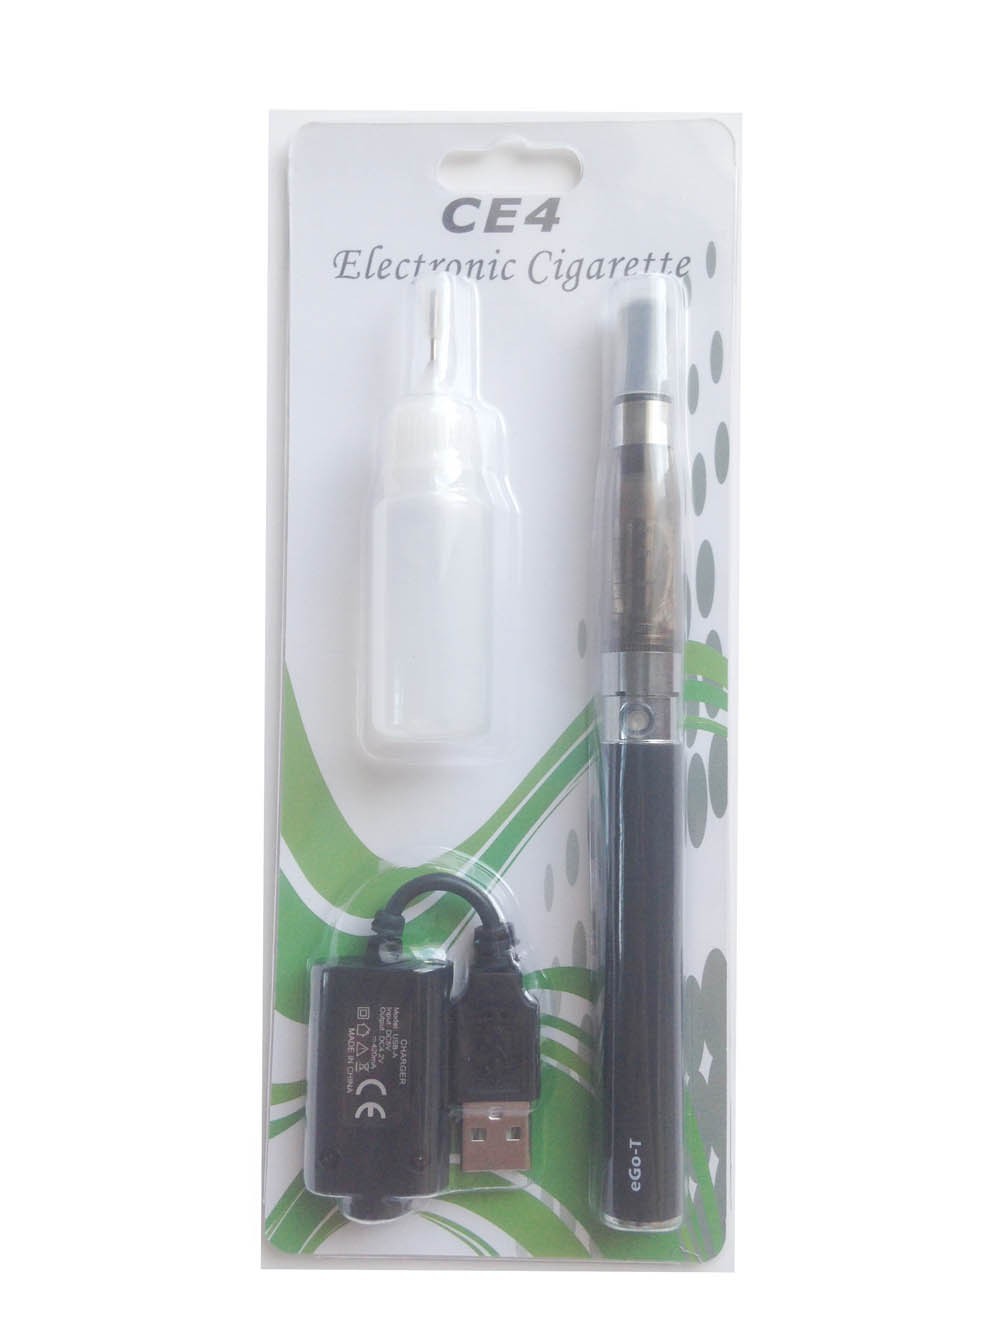 CE4 EGO Blister Package Kits_1